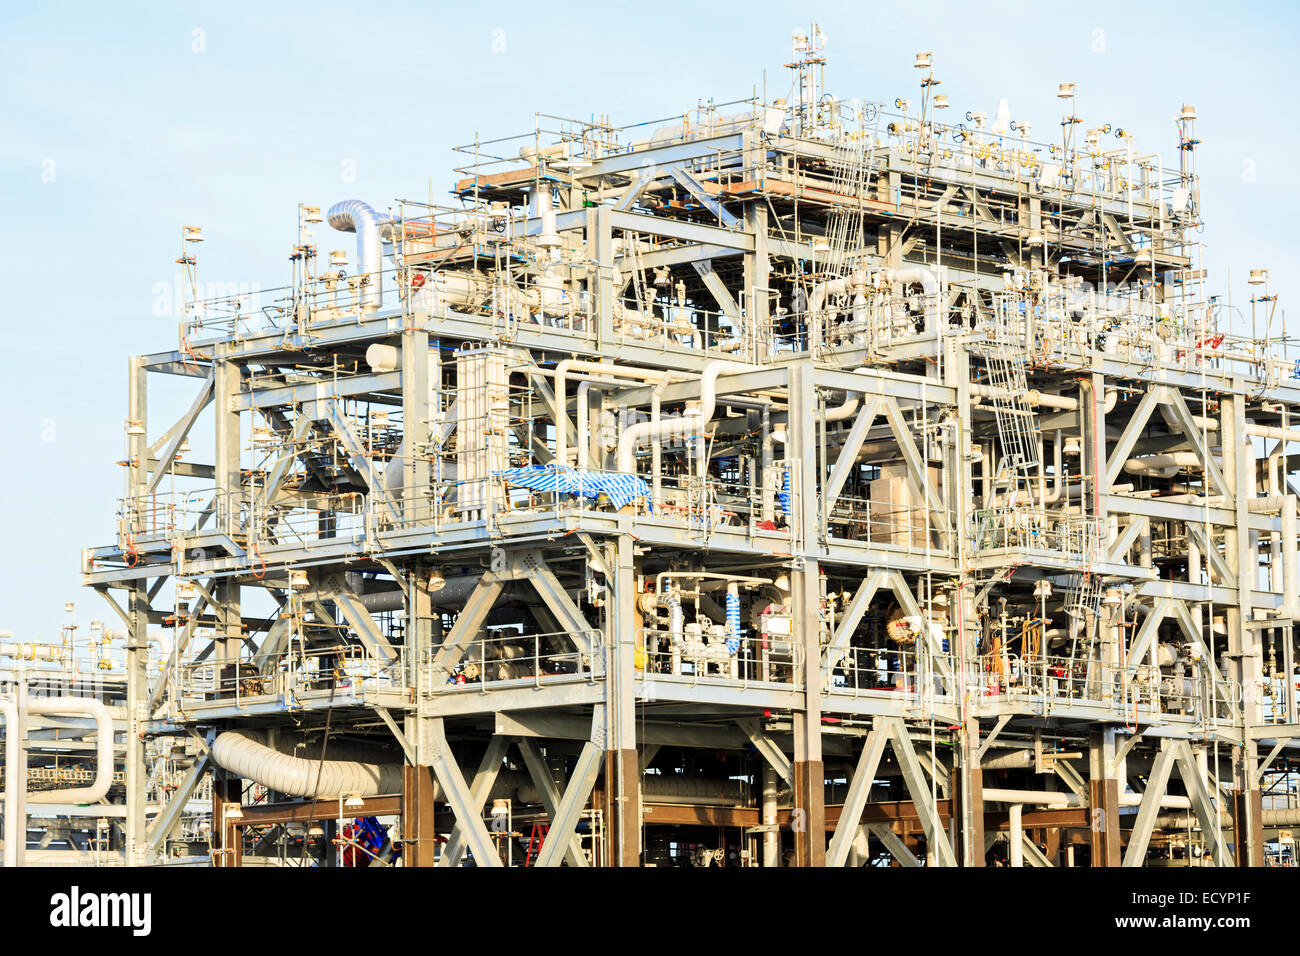 What are liquefied natural gas stocks?